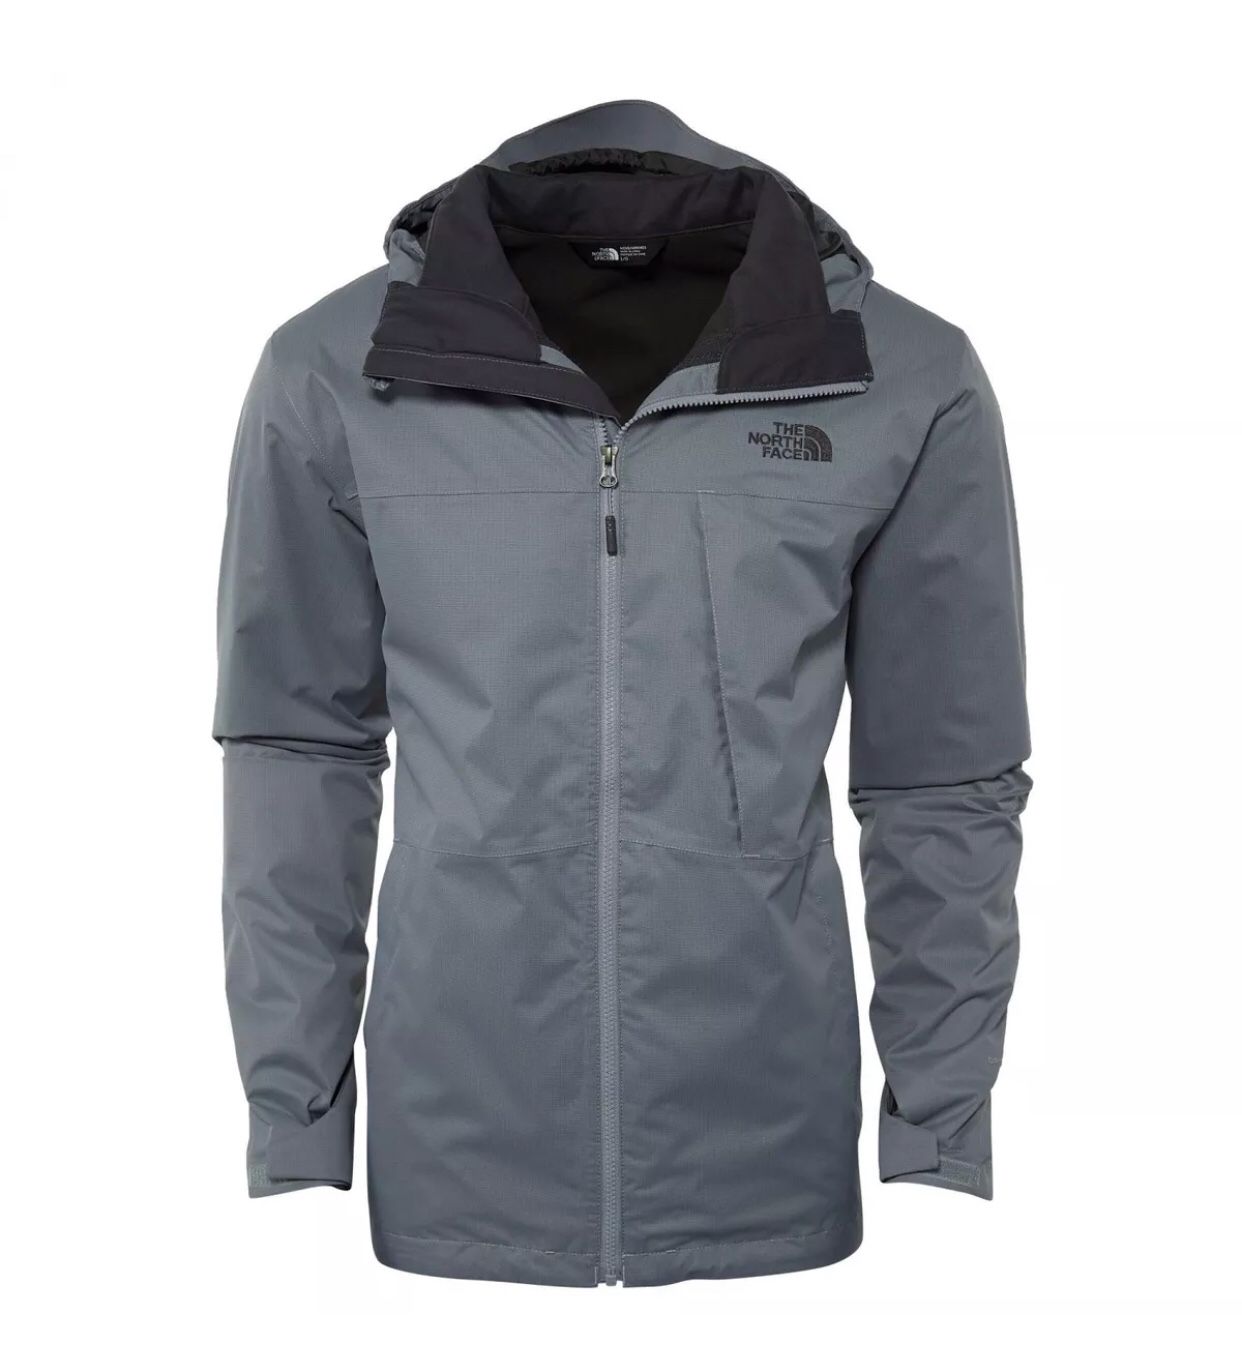 North Face Arrowhead Triclimate size Large